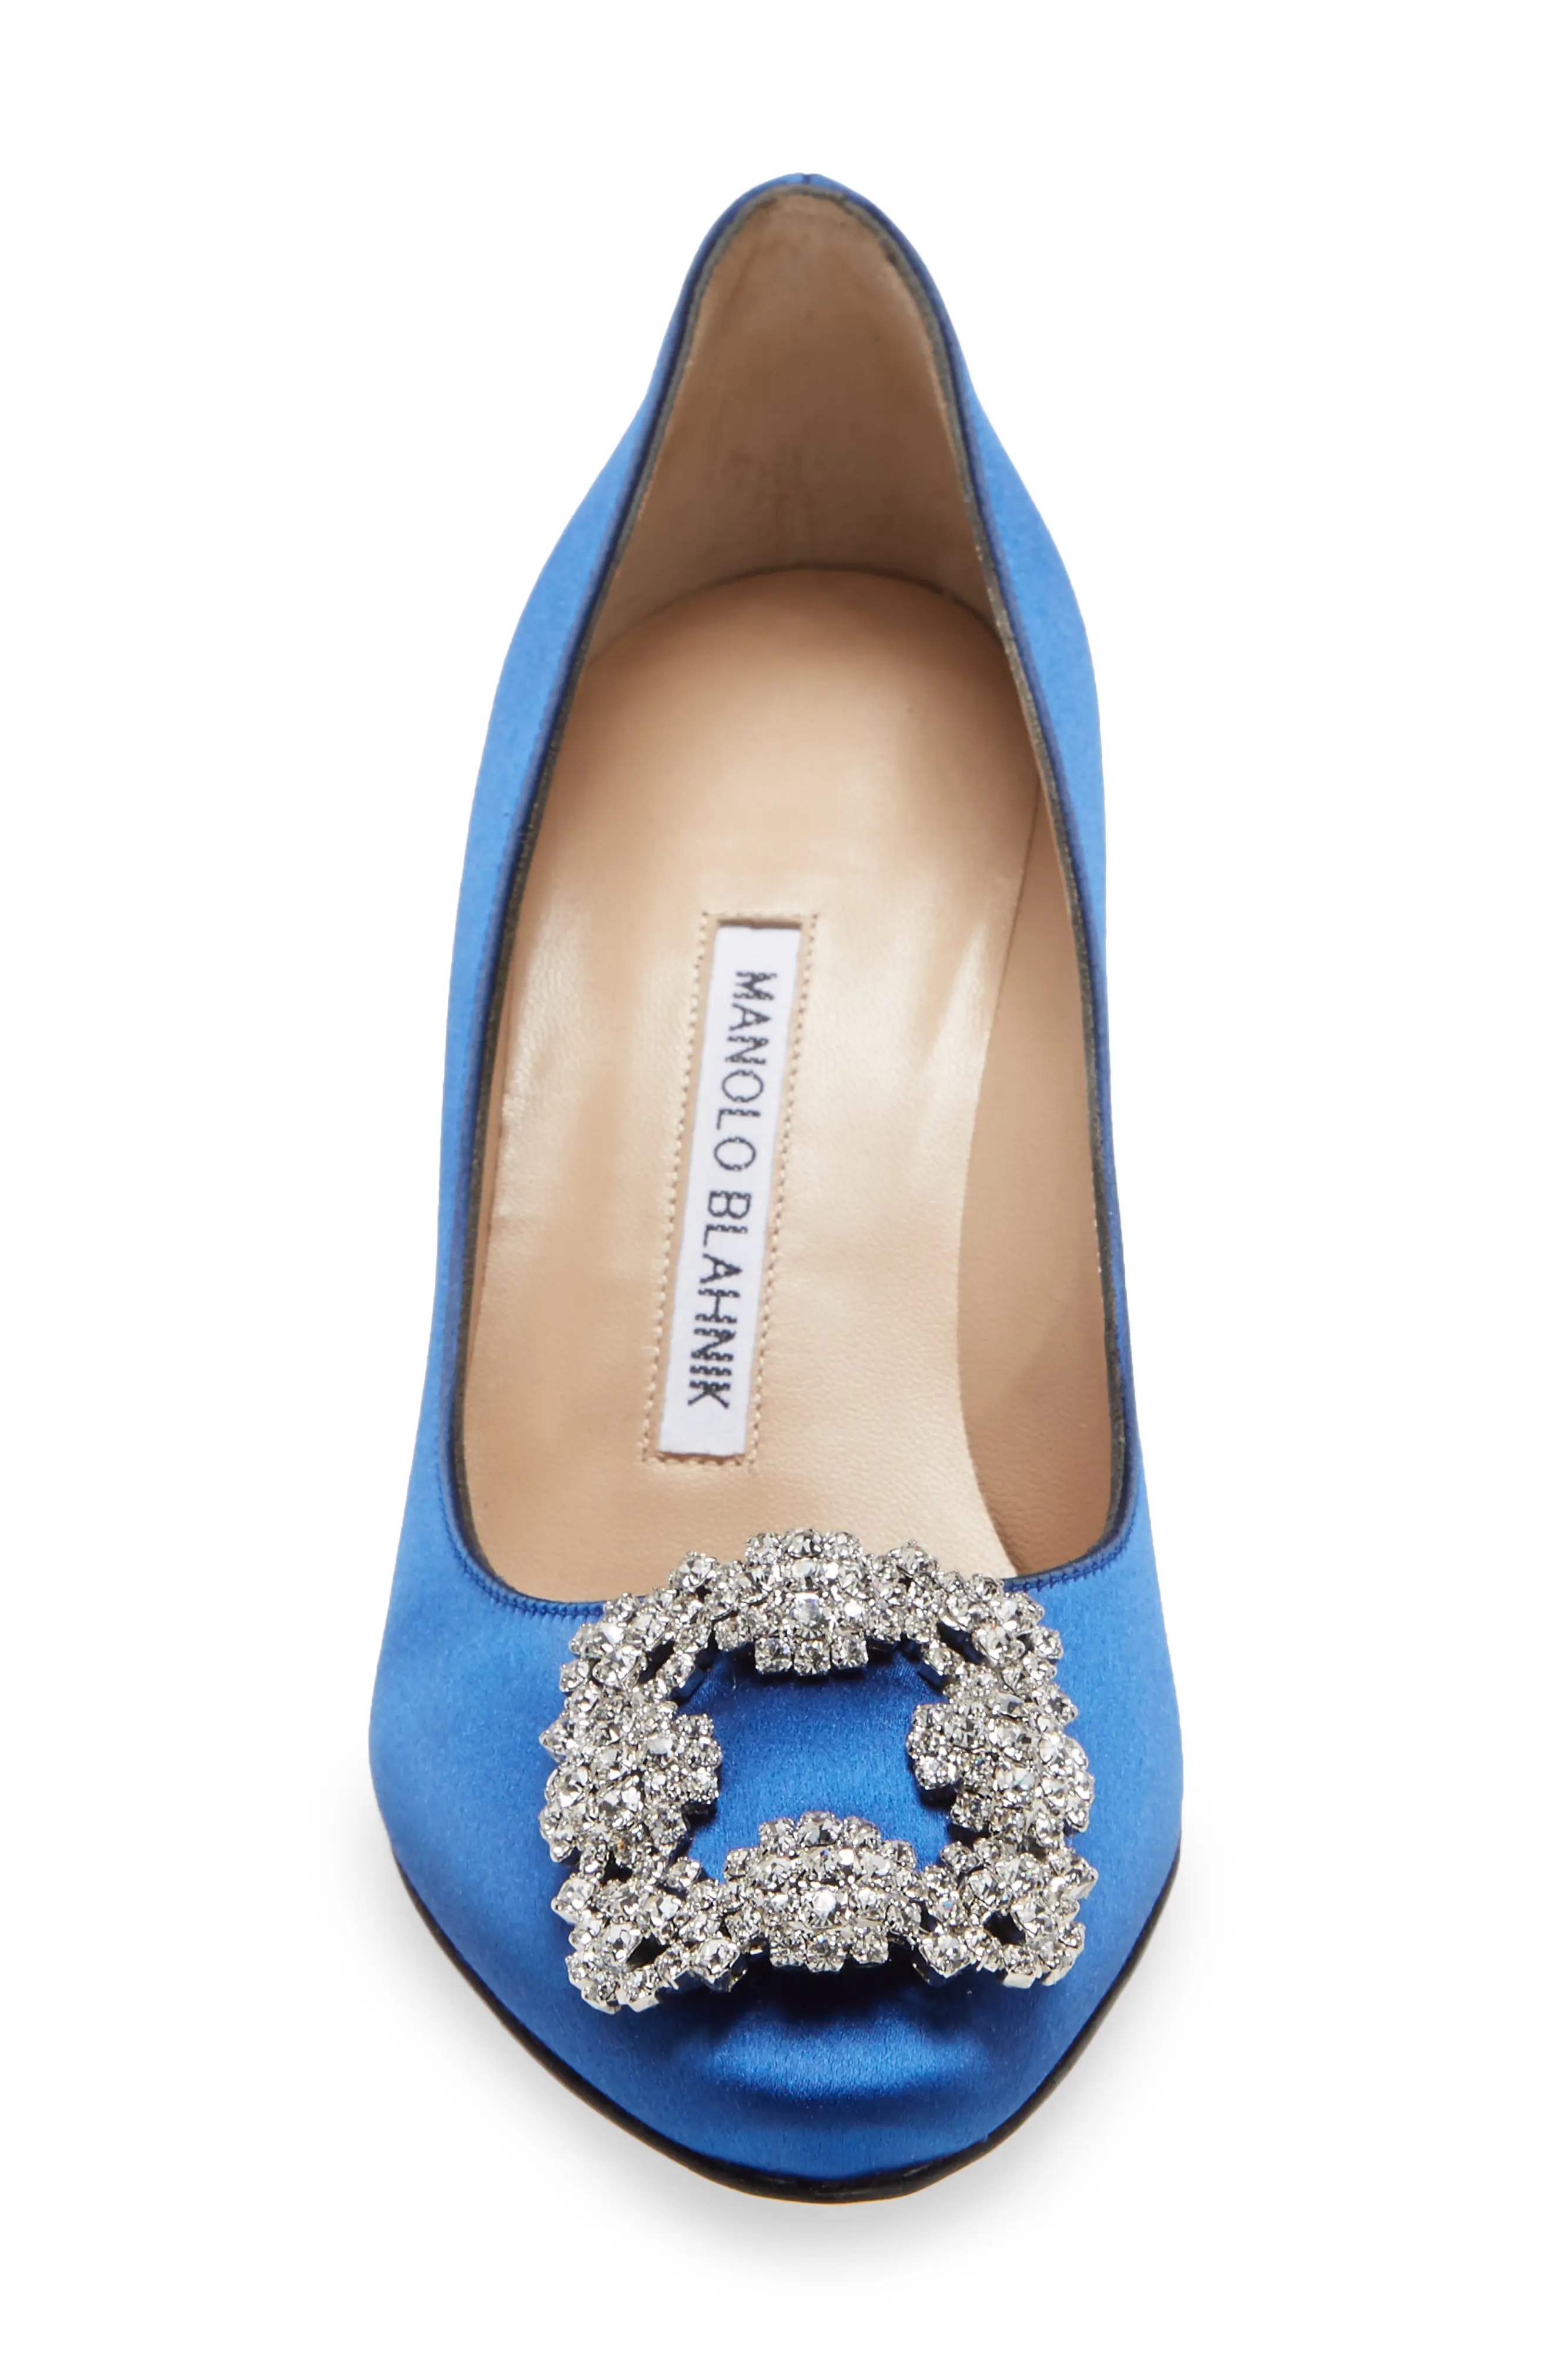 Hangisi Crystal Buckle Pump in Blue Satin Clear/Buckle - 4